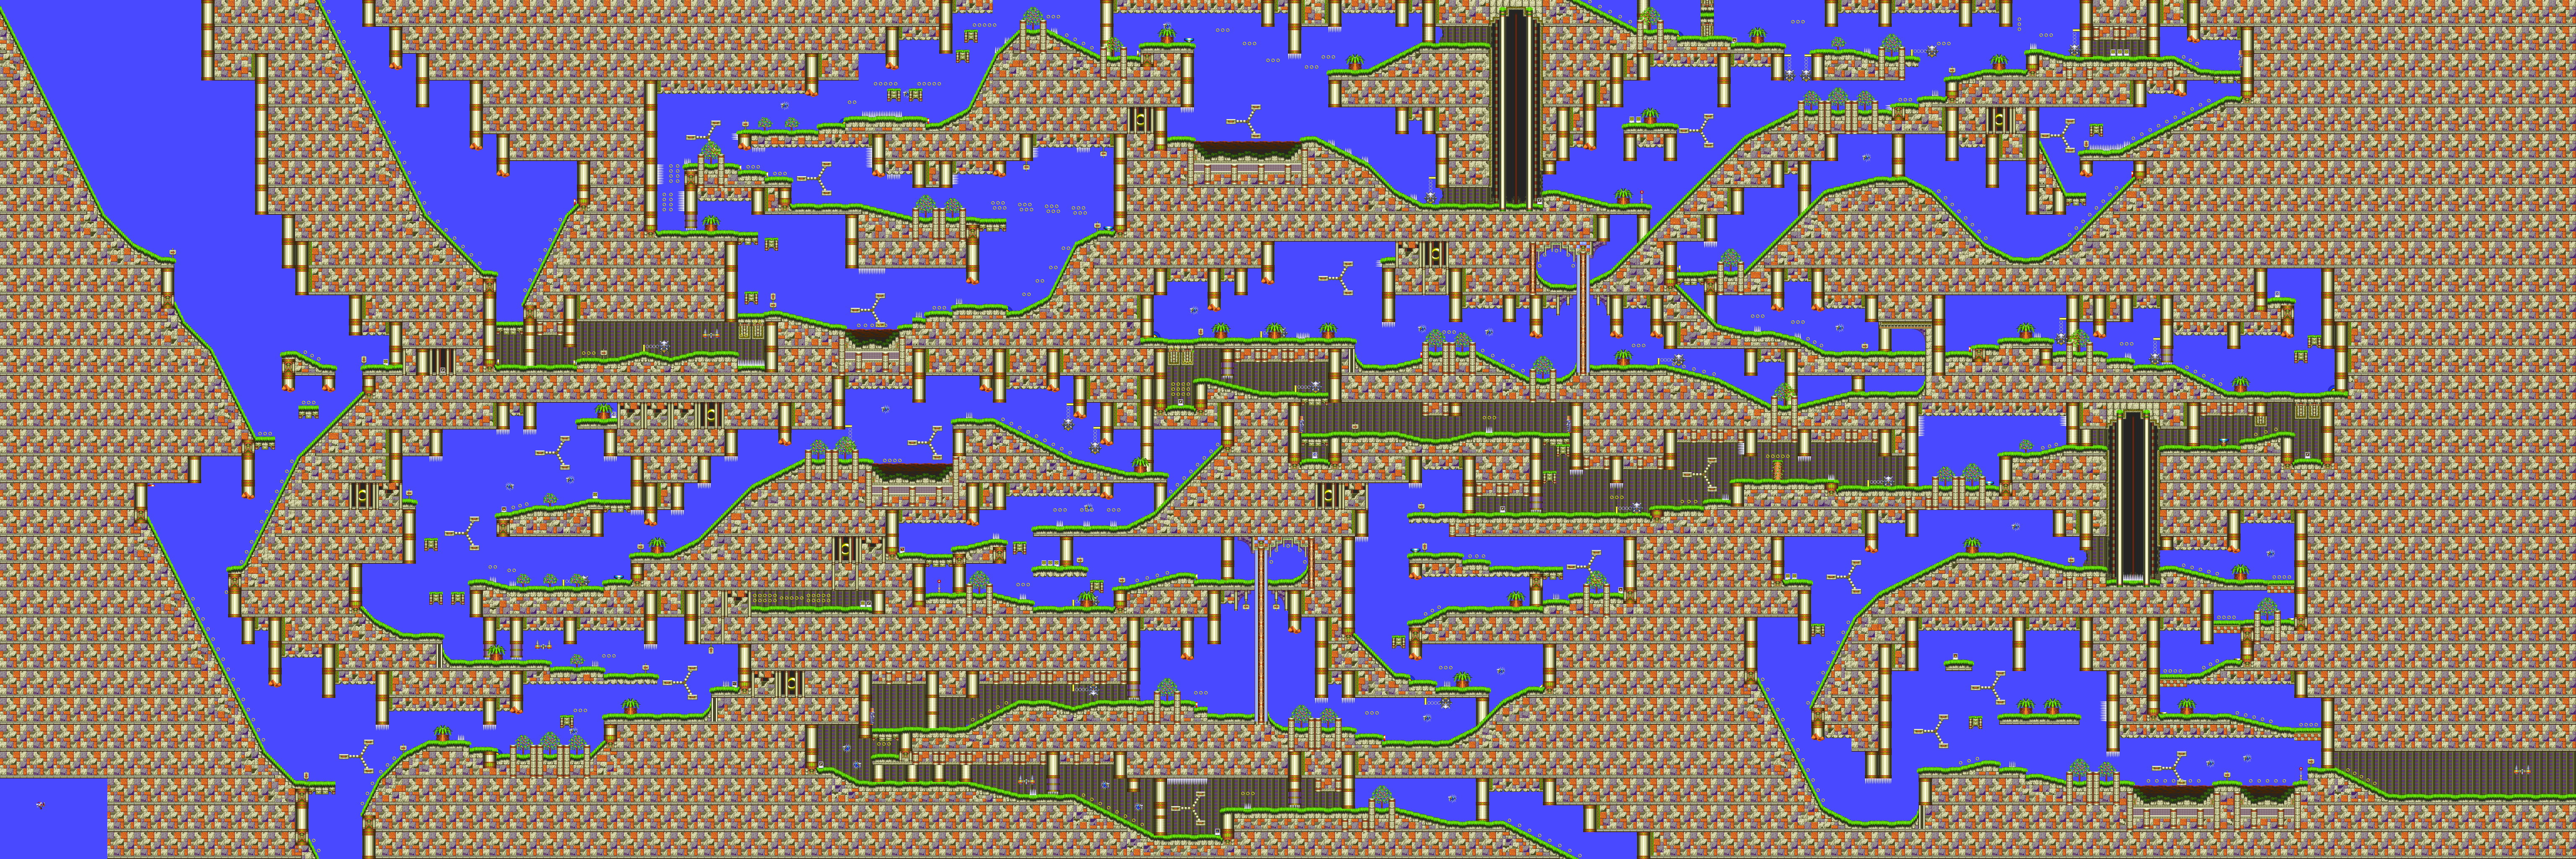 Sonic3 MD Map Mg1.png